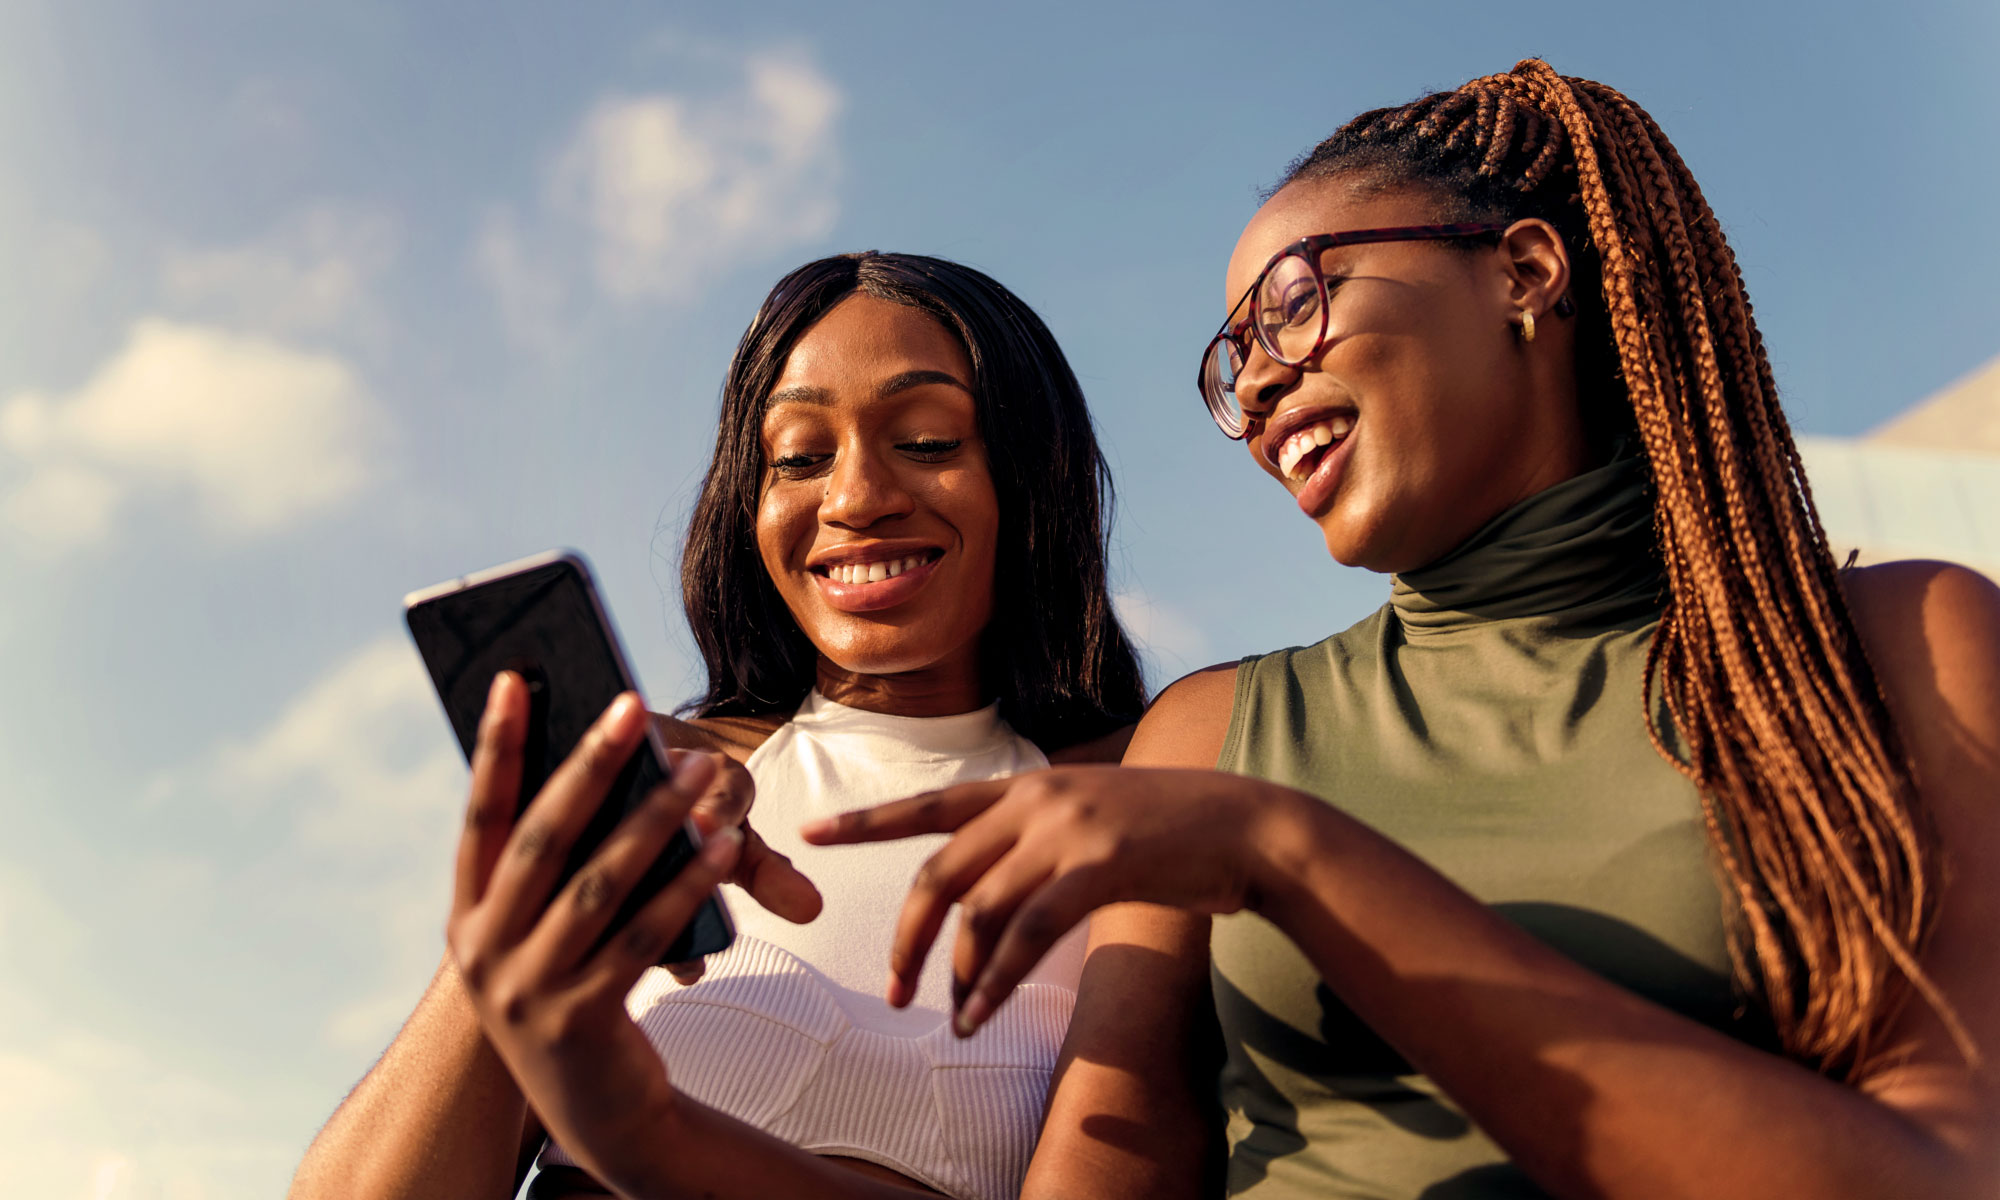 Two young adult women looking at a mobile phone outside